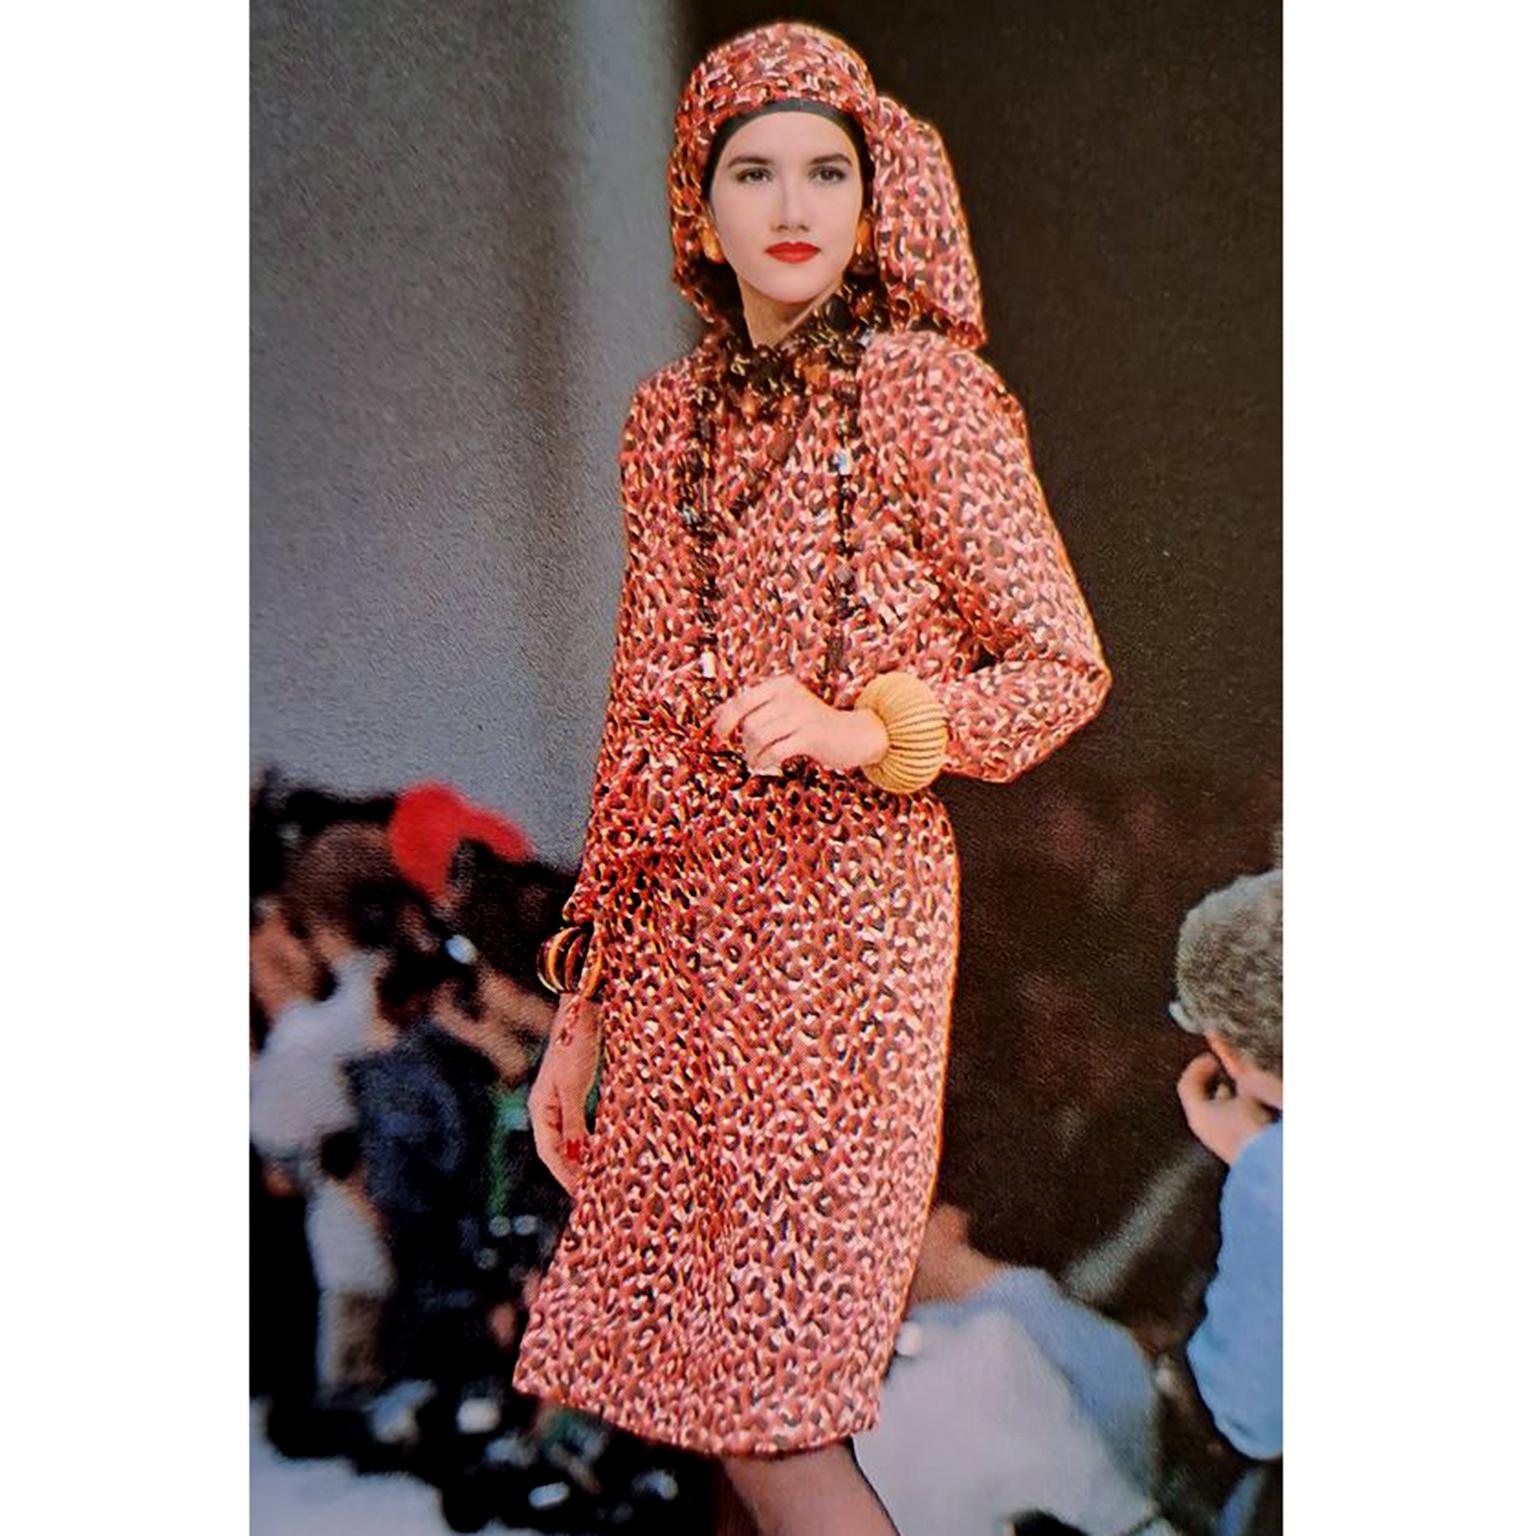 This is a fun Yves Saint Laurent leopard print silk dress from the YSL Spring/Summer 1989 runway collection. This lovely dress is in a playful salmon orange, brown and white leopard print, with a matching separate fabric sash belt.
The dress has the